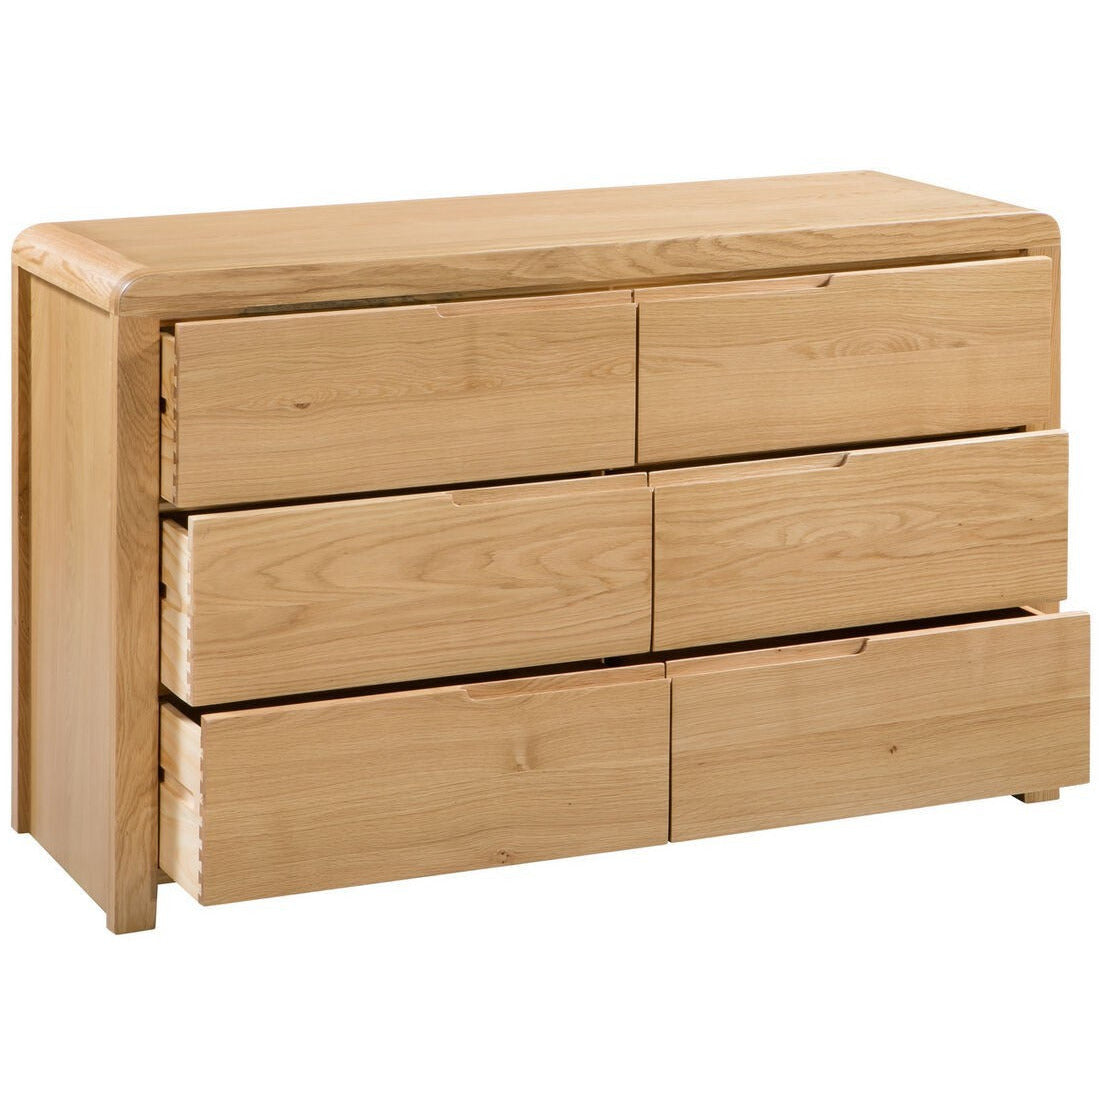 CURVE 6 DRAWER WIDE CHEST